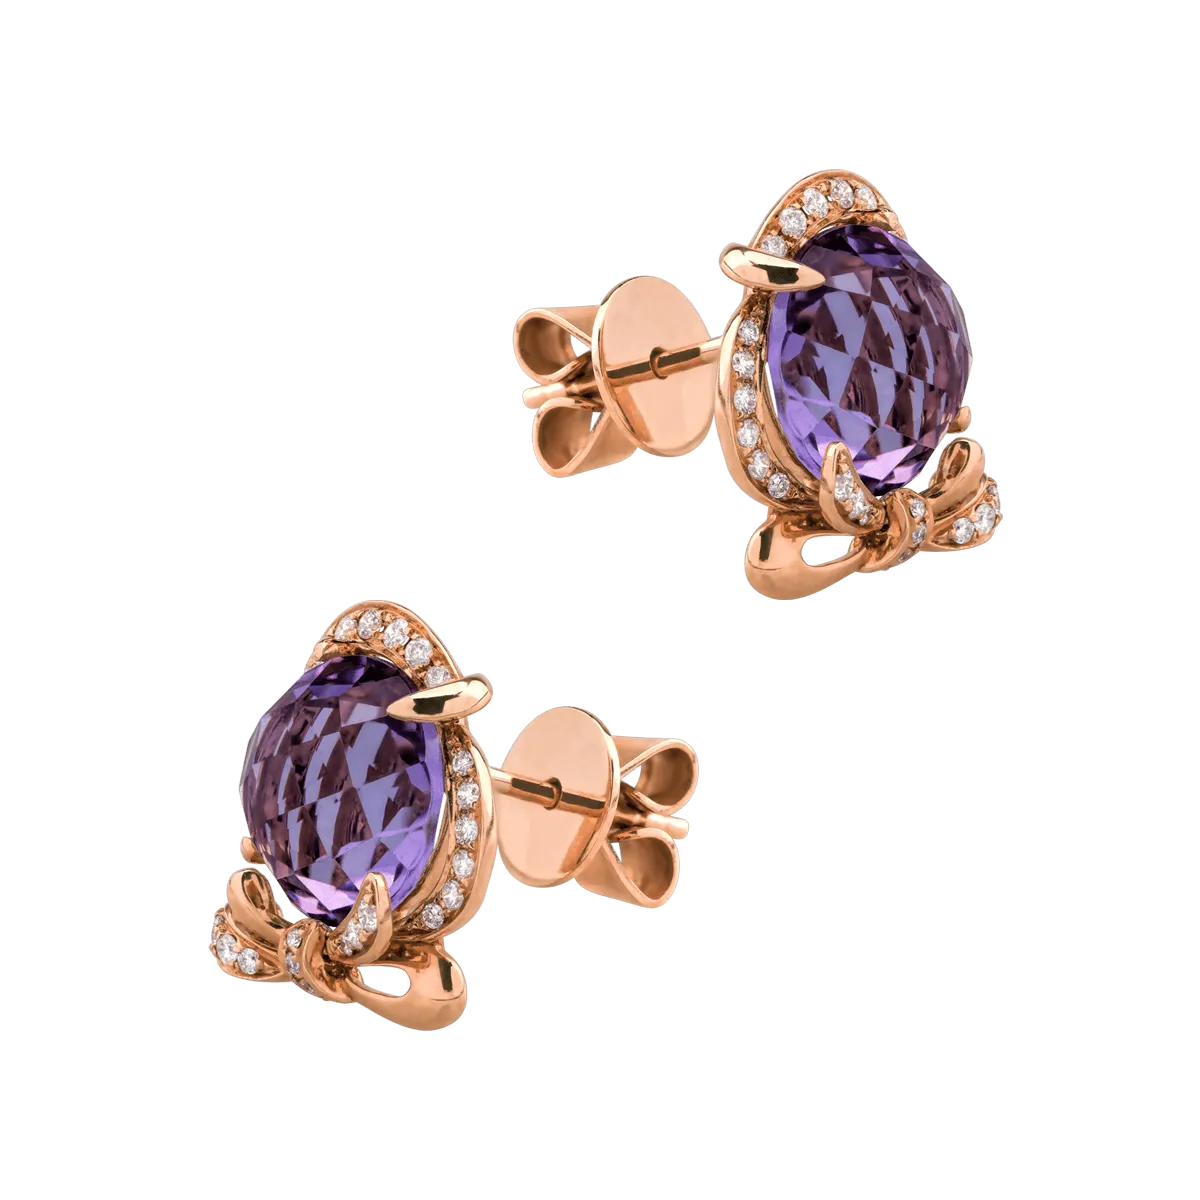 18K rose gold earrings with 6.4ct pink amethysts and 0.3ct diamonds